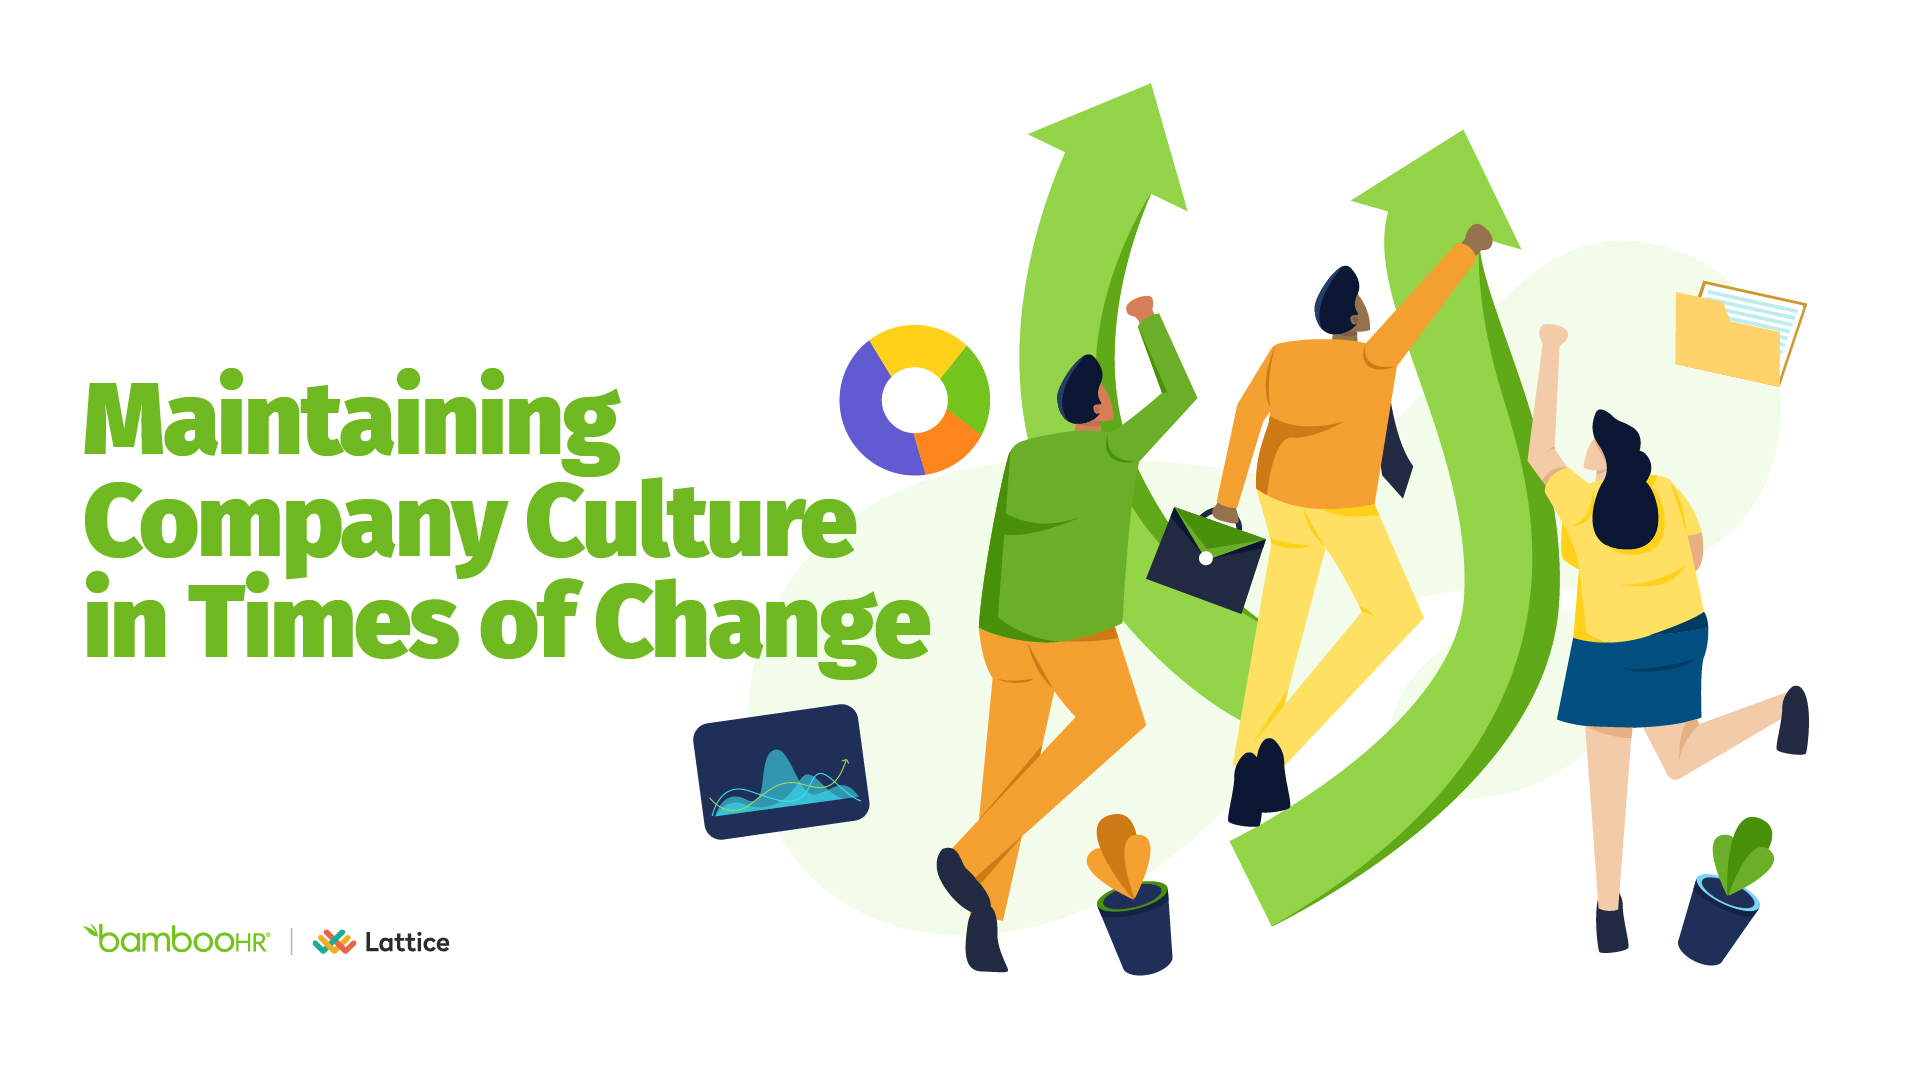 Maintaining Company Culture in Times of Change